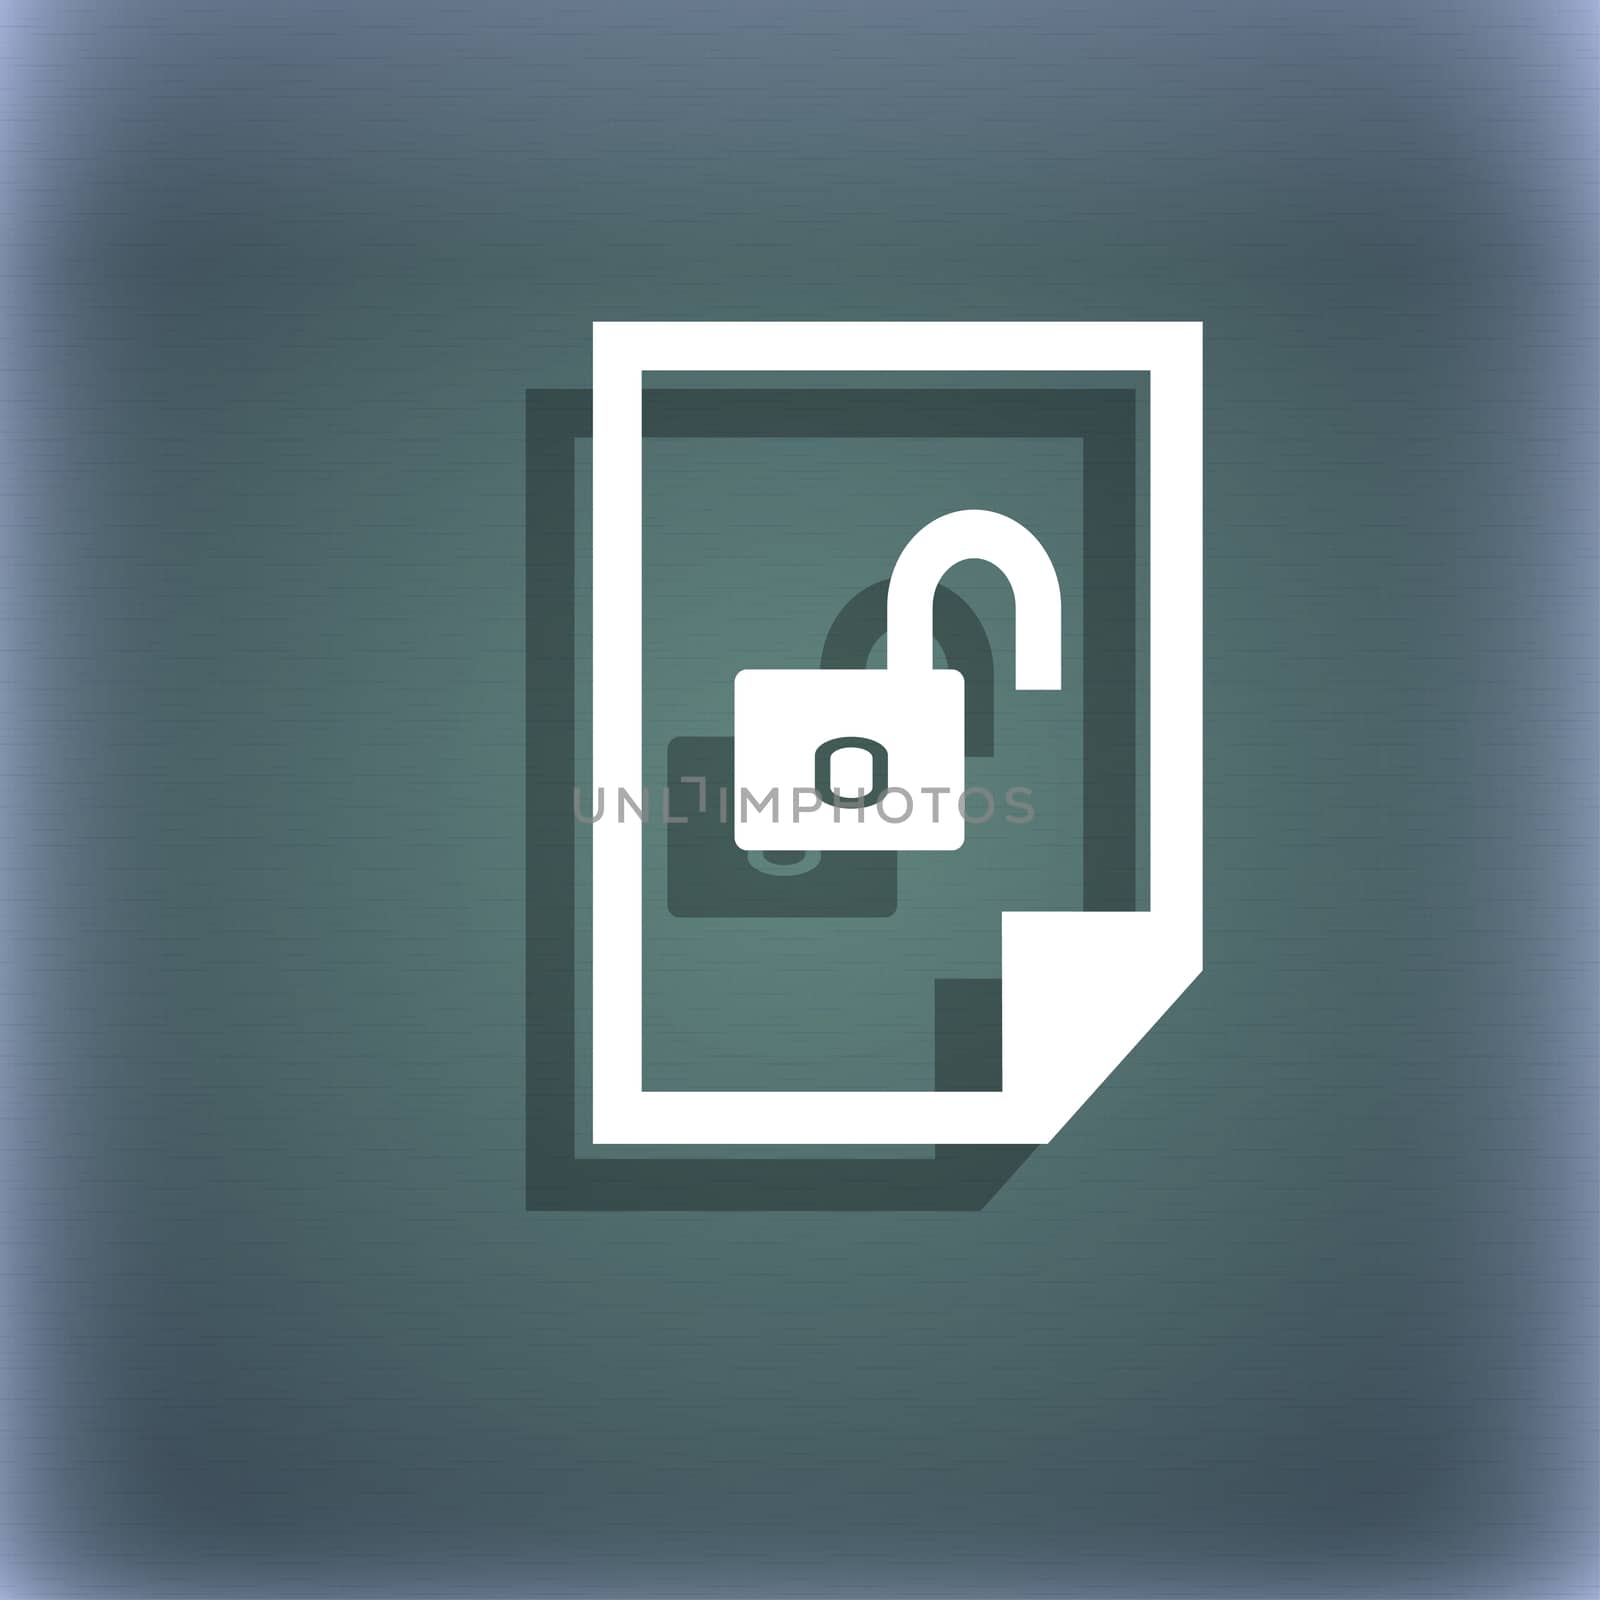 File unlocked icon sign. On the blue-green abstract background with shadow and space for your text. illustration